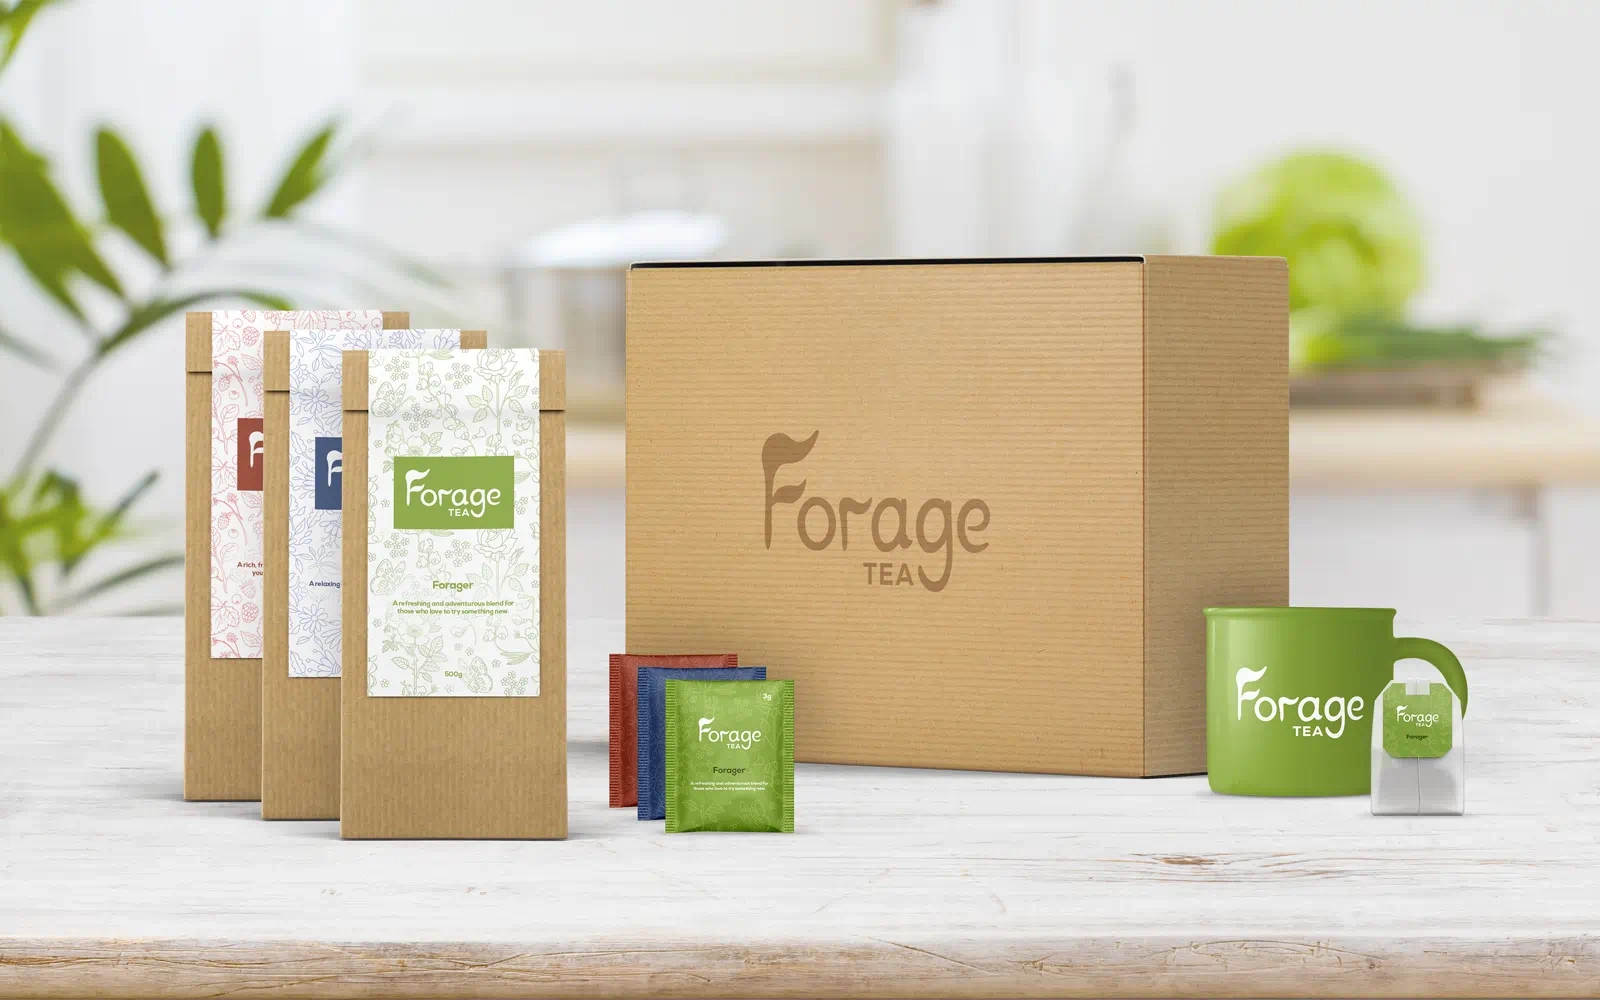 Packaging mockups with the Forage Tea branding, including various flavours in different colours, showing the outer box, inner packet, tea bag sachet and tea bag displayed in a well lit, white, modern kitchen